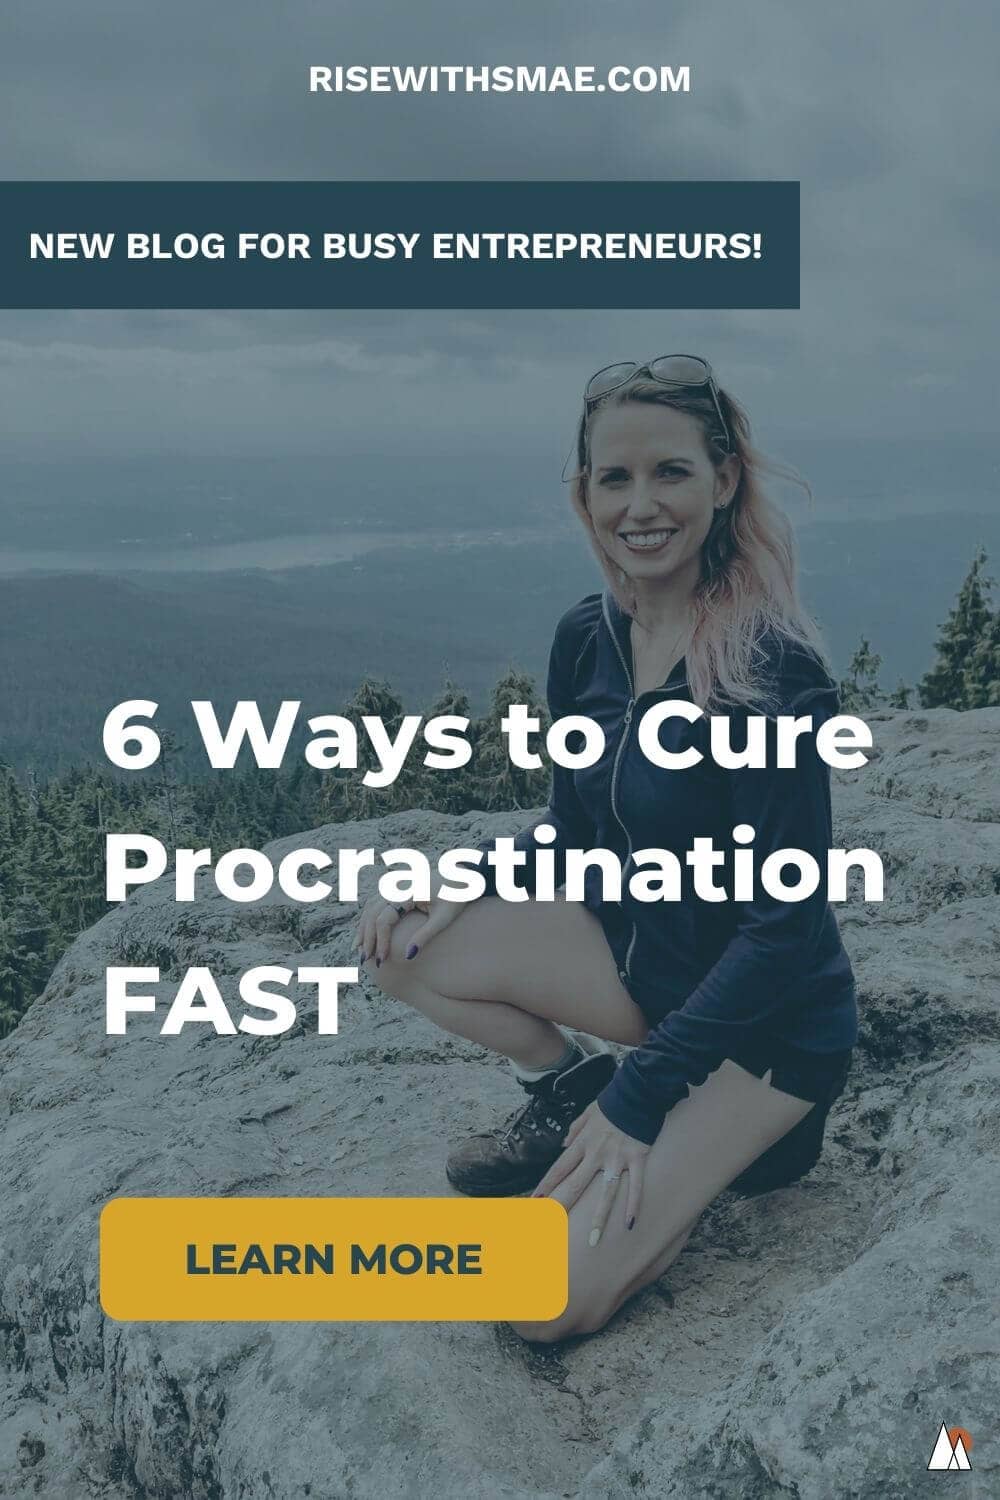 How Can I Stop Procrastinating? 6 Ways to Cure Procrastination FAST